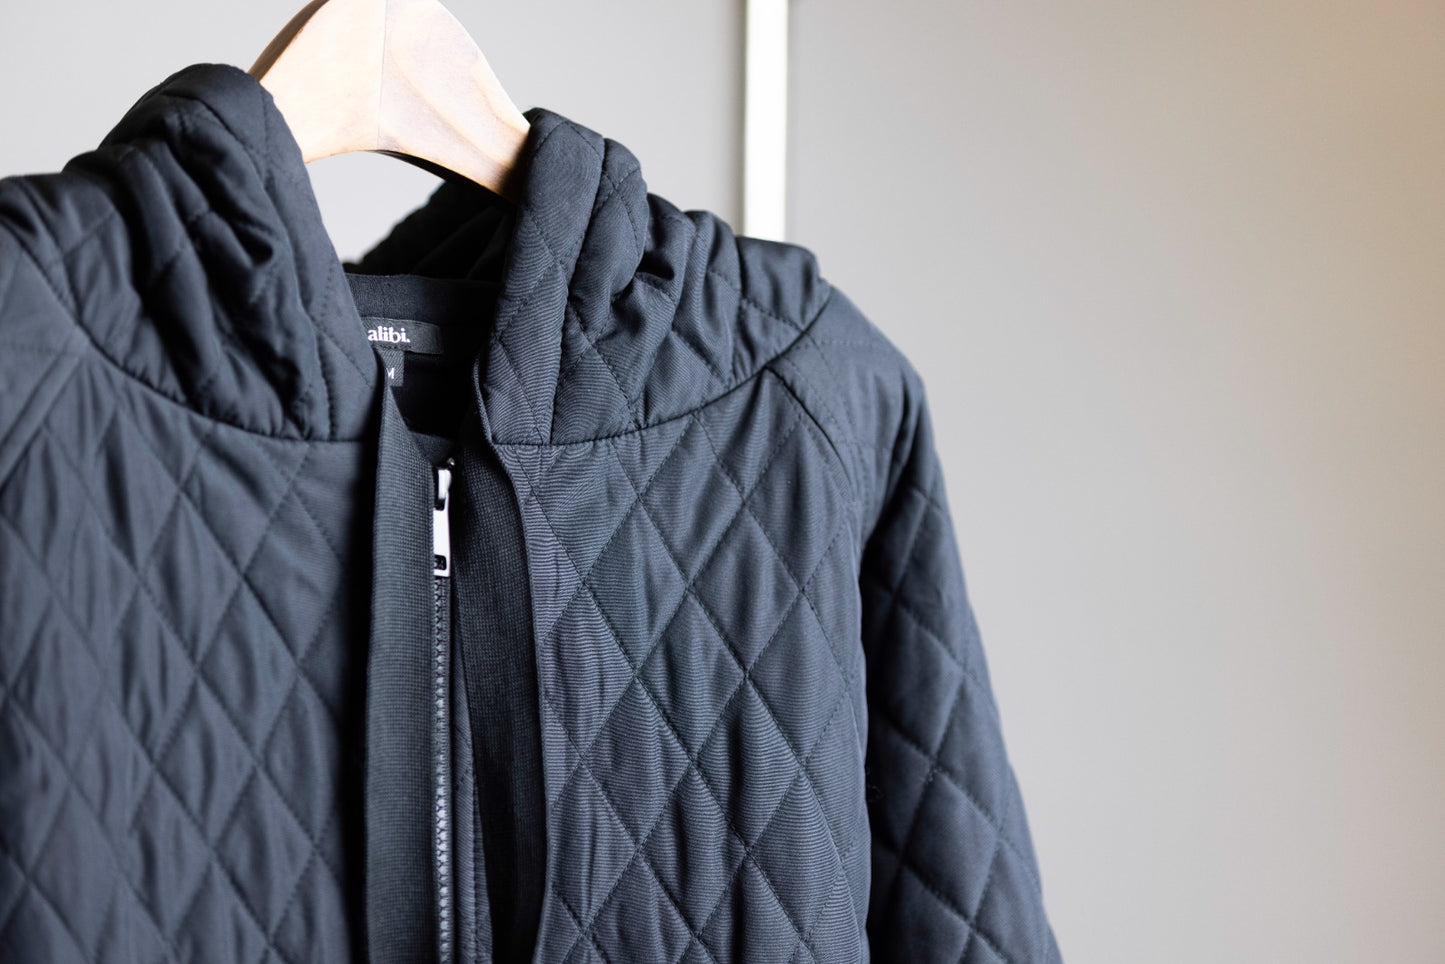 the quilted bomber jacket sustainable fashion eco-friendly The Quilted Bomber is the ultimately cosy jacket for cooler temperatures. We used the Recycled polyester on shell with recycled cotton mix with recycled polyester as lining.